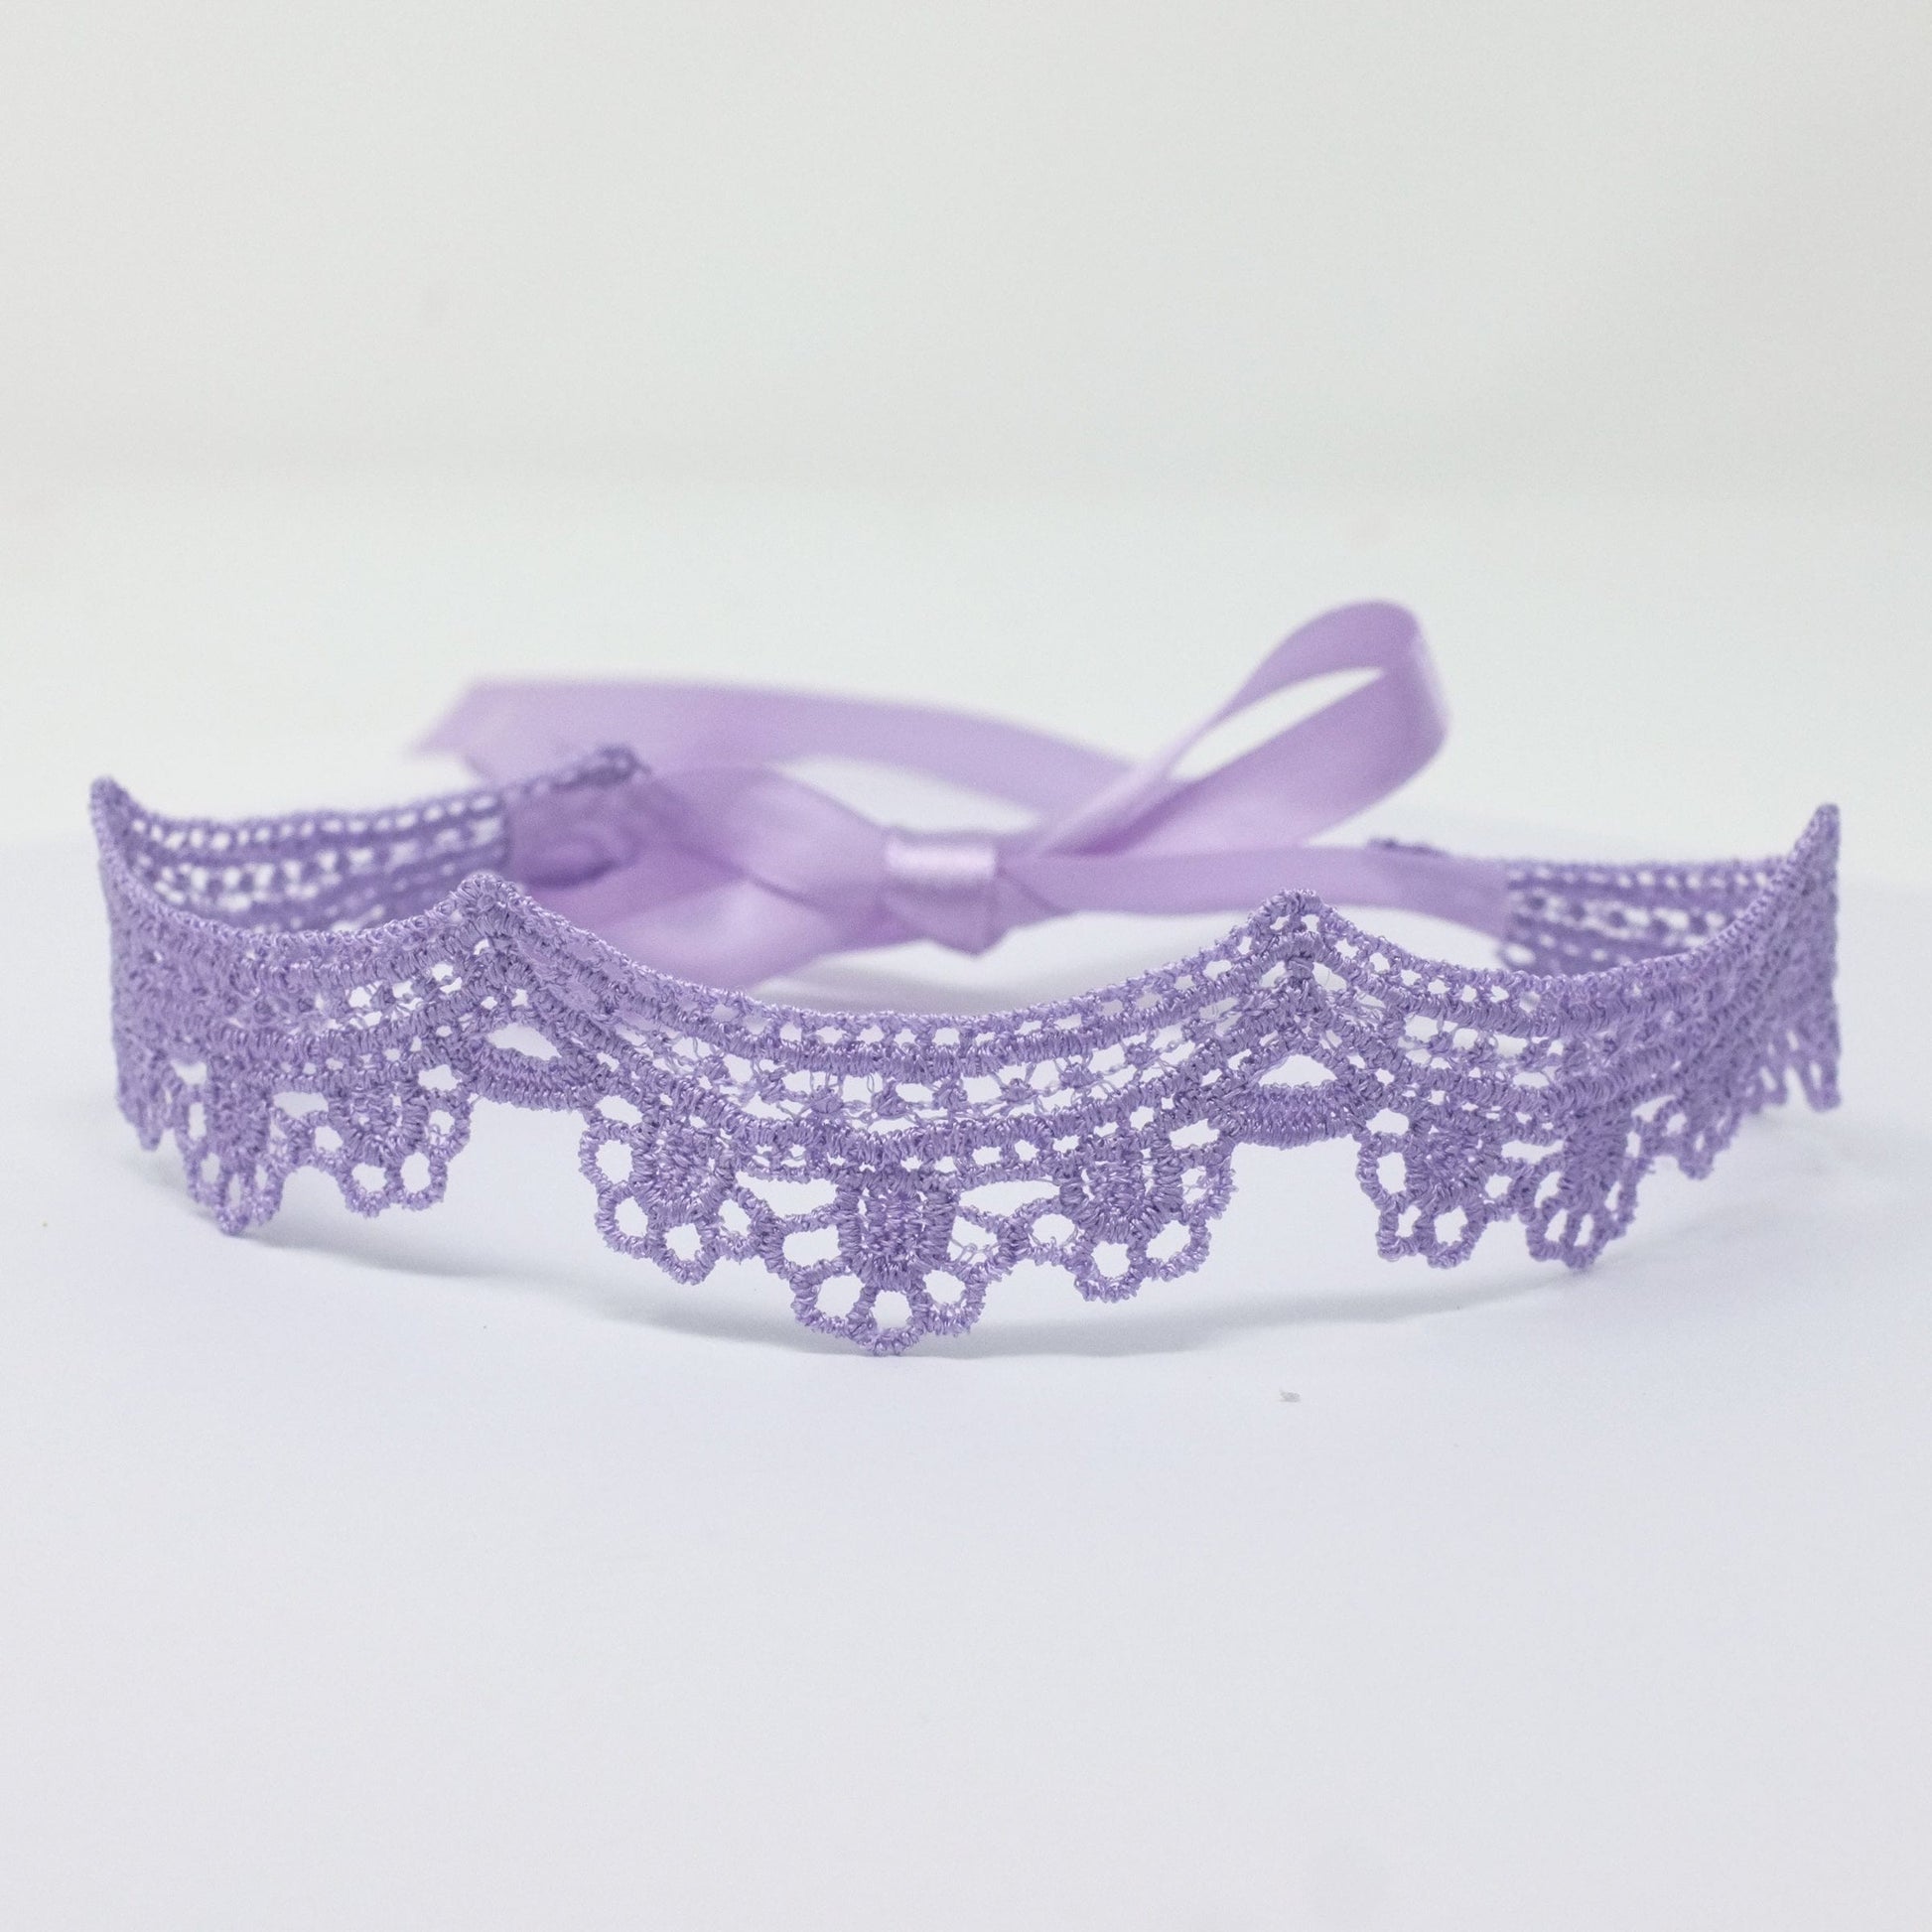 Lavender lace choker with scalloped design